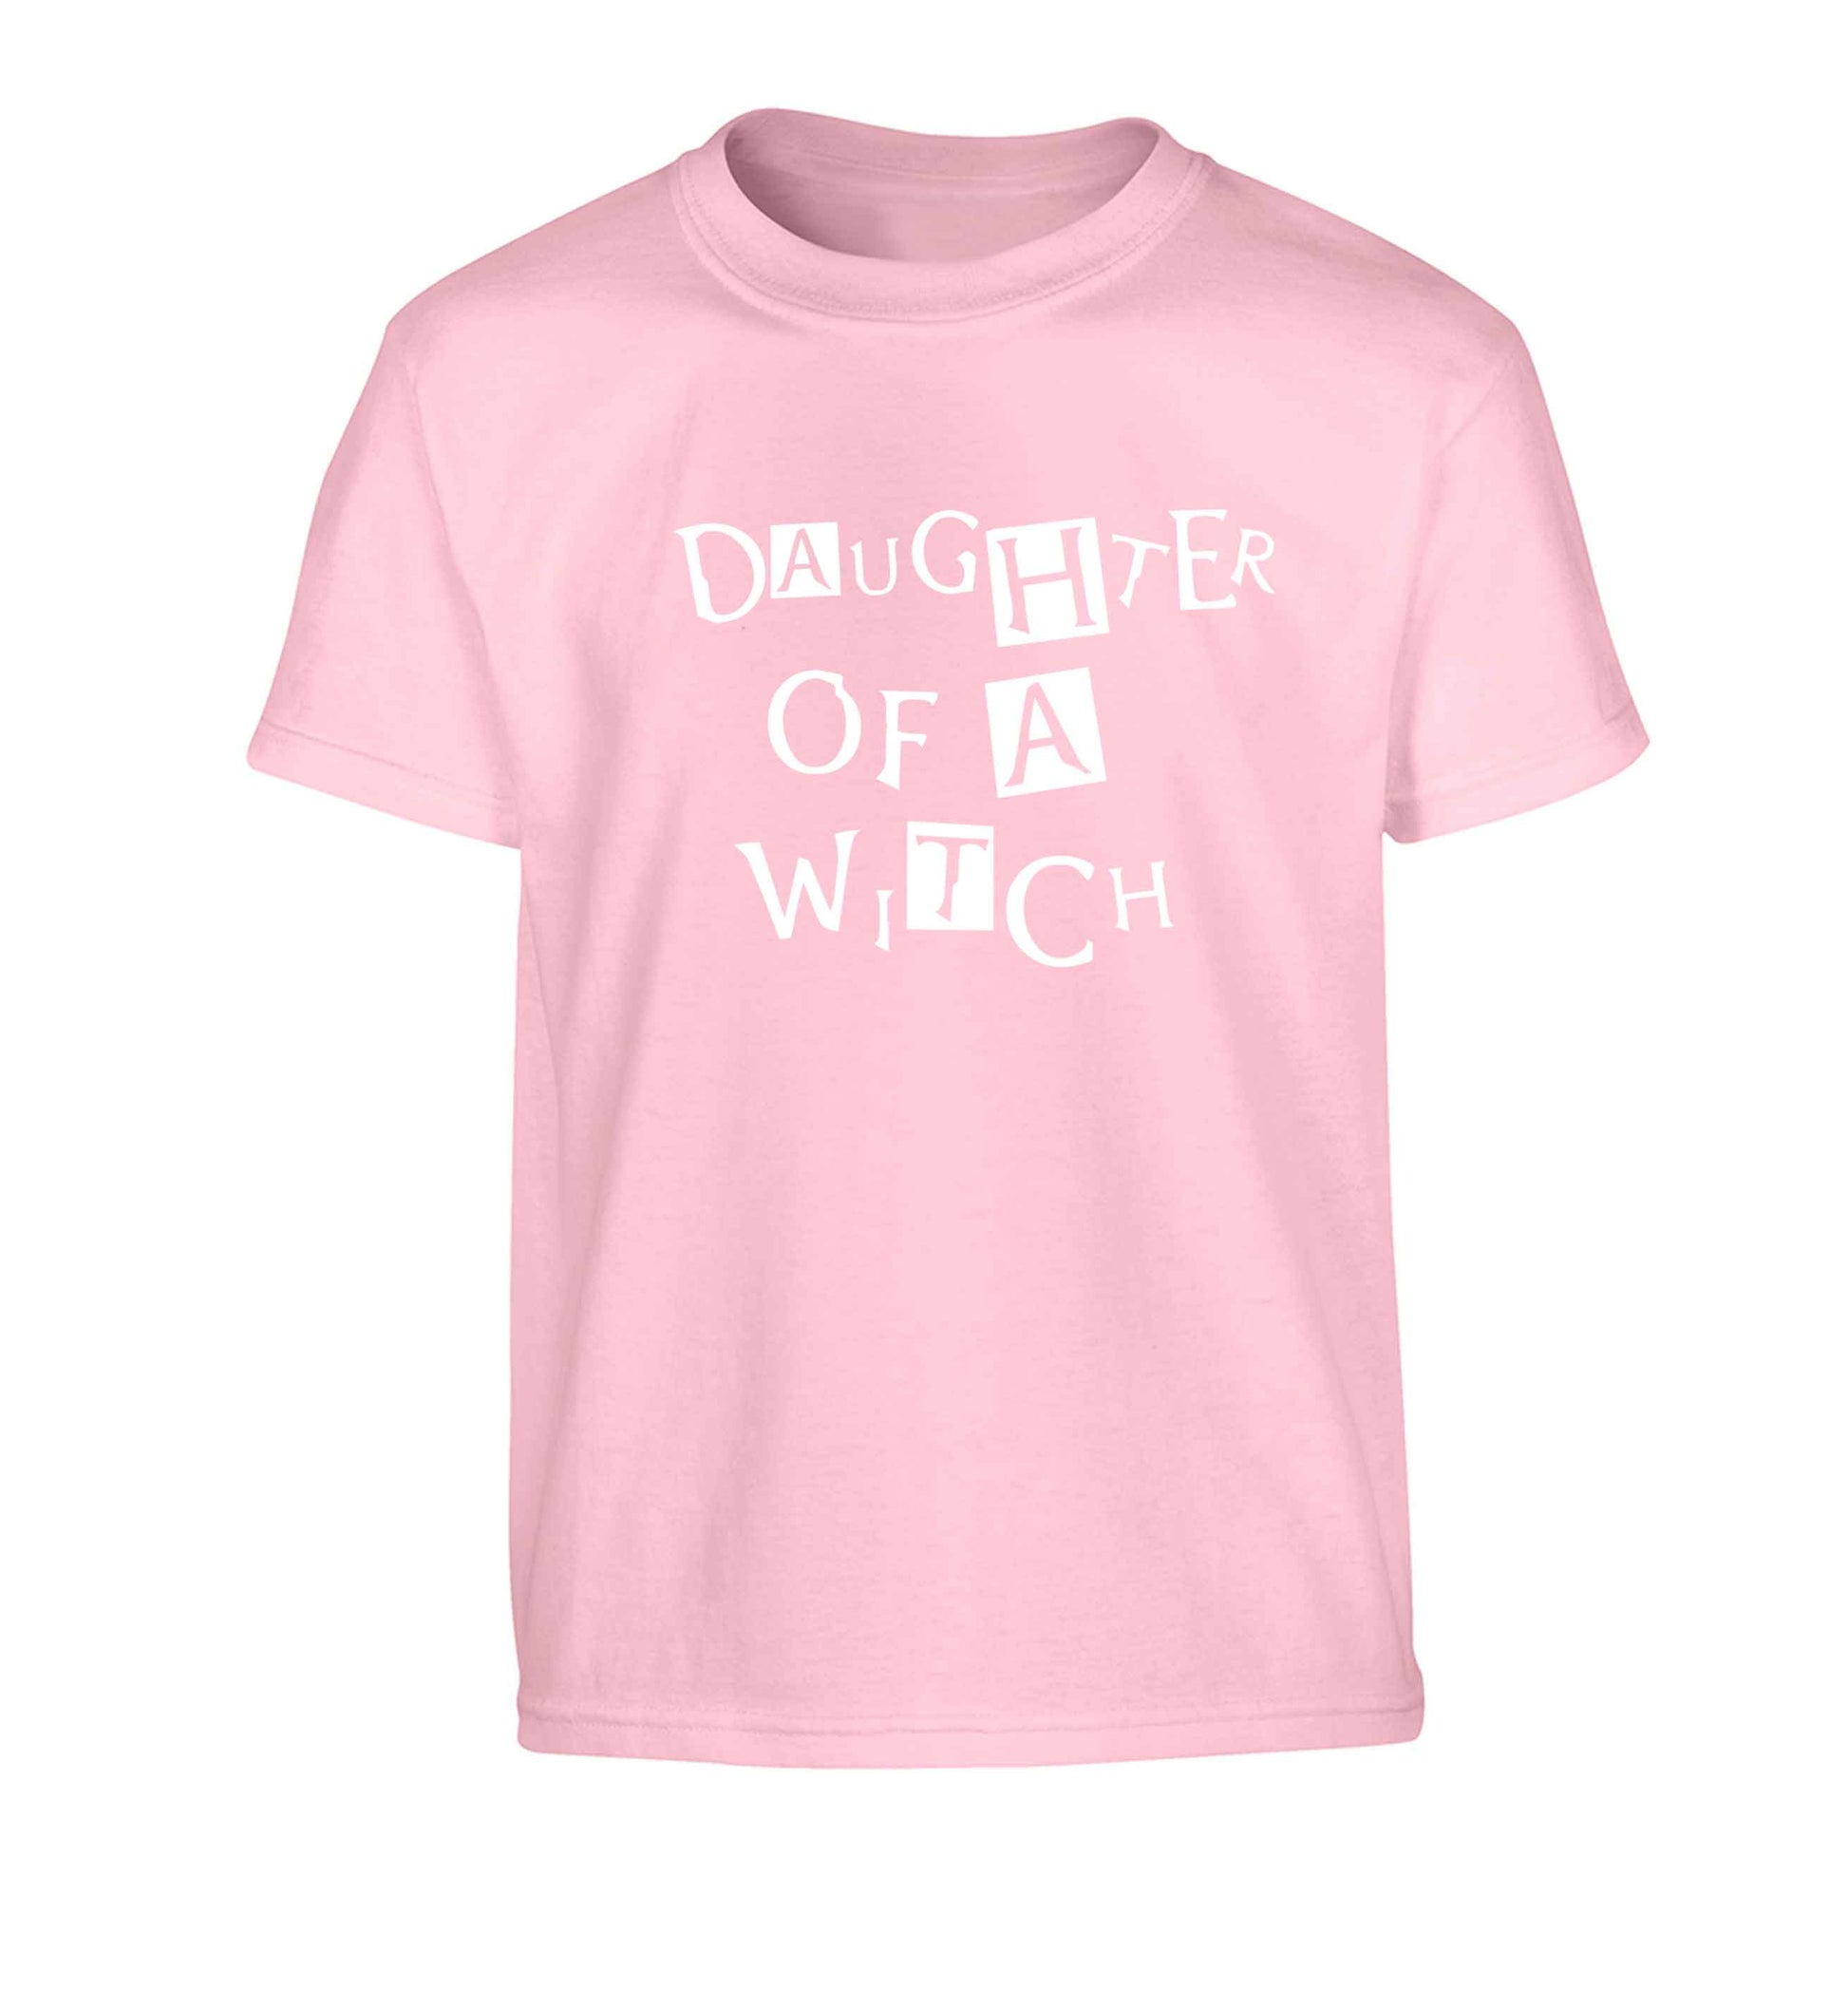 Daughter of a witch Children's light pink Tshirt 12-13 Years